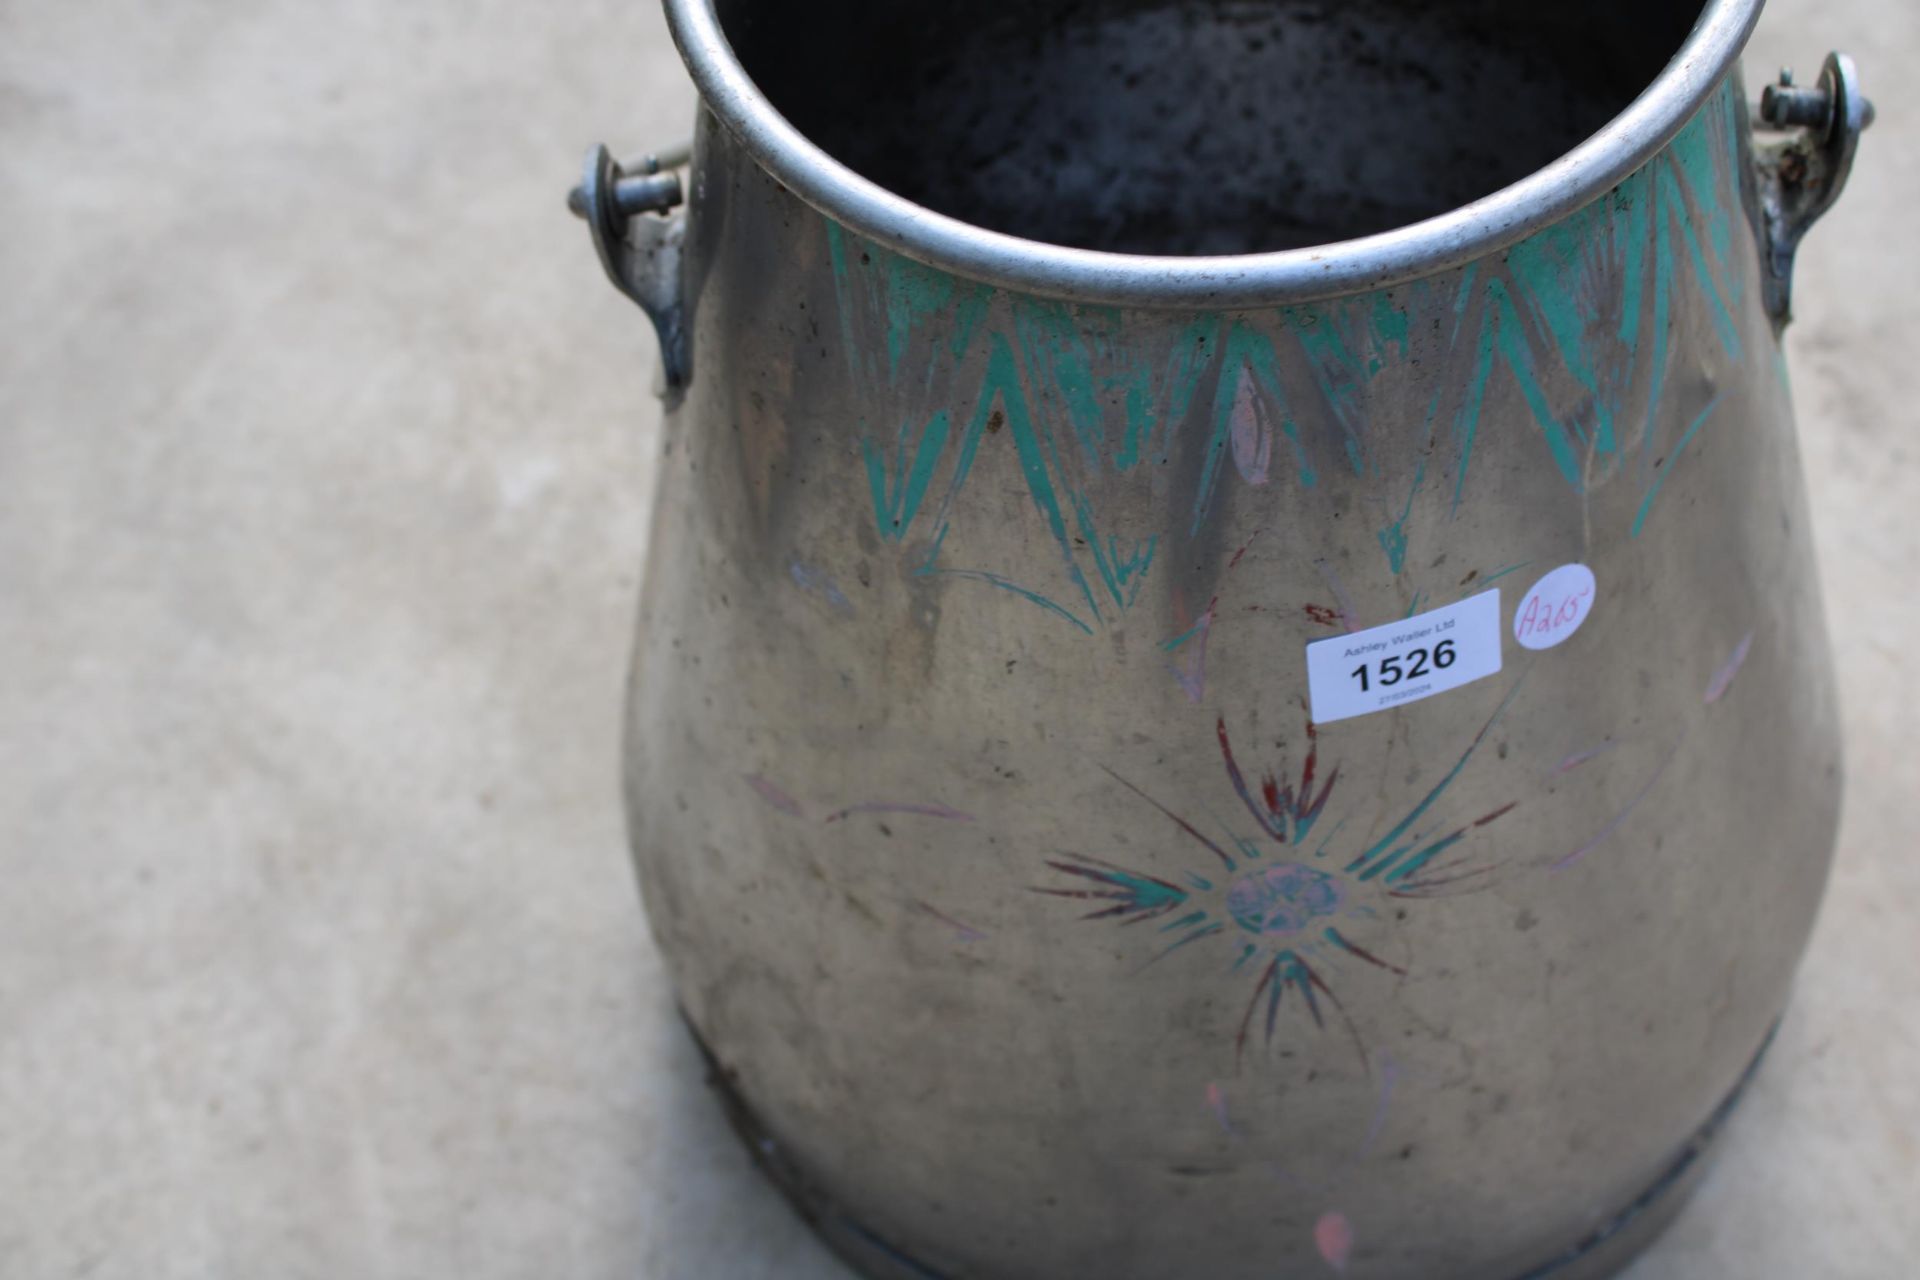 A HAND PAINTED STAINLESS STEEL MILKING BUCKET - Image 4 of 4